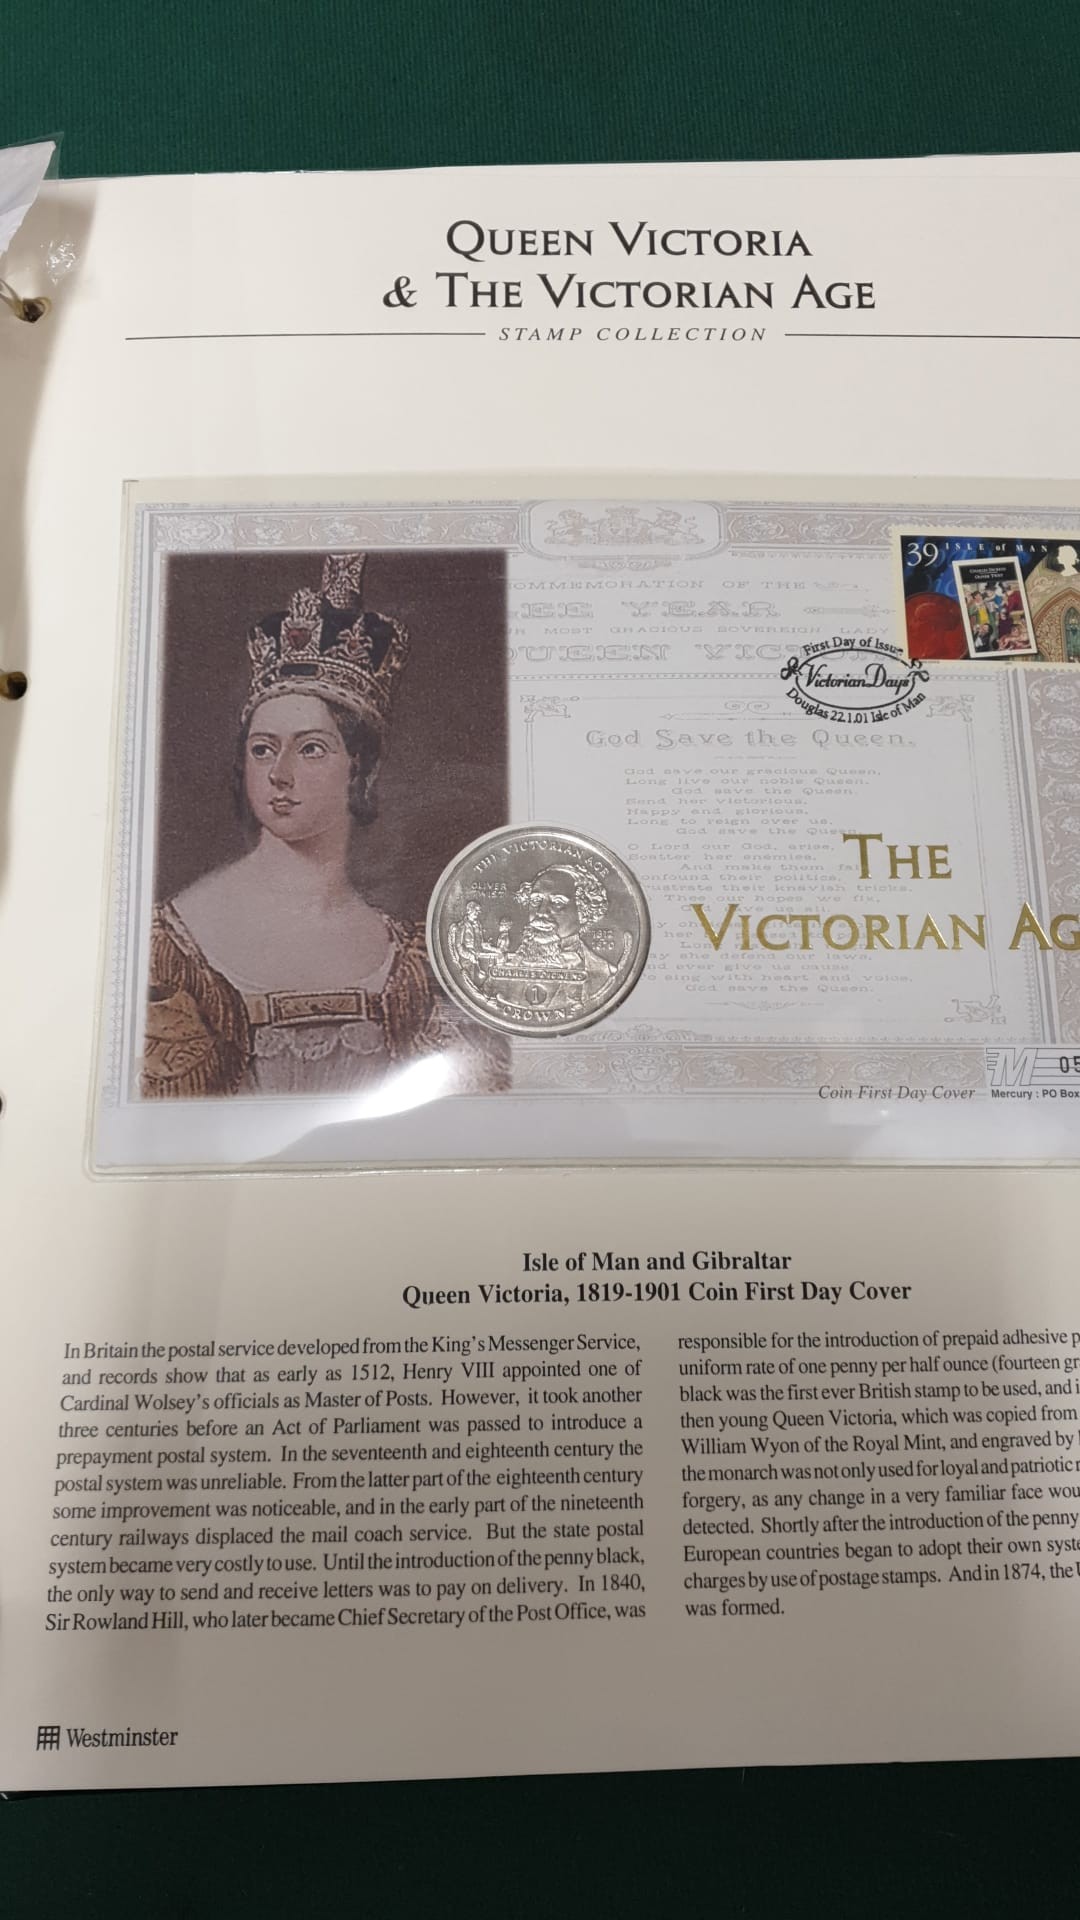 Stunning Collection of Queen Victoria & Victorian Age Stamp ANd Coin 1st Day Covers In Album - Image 6 of 12